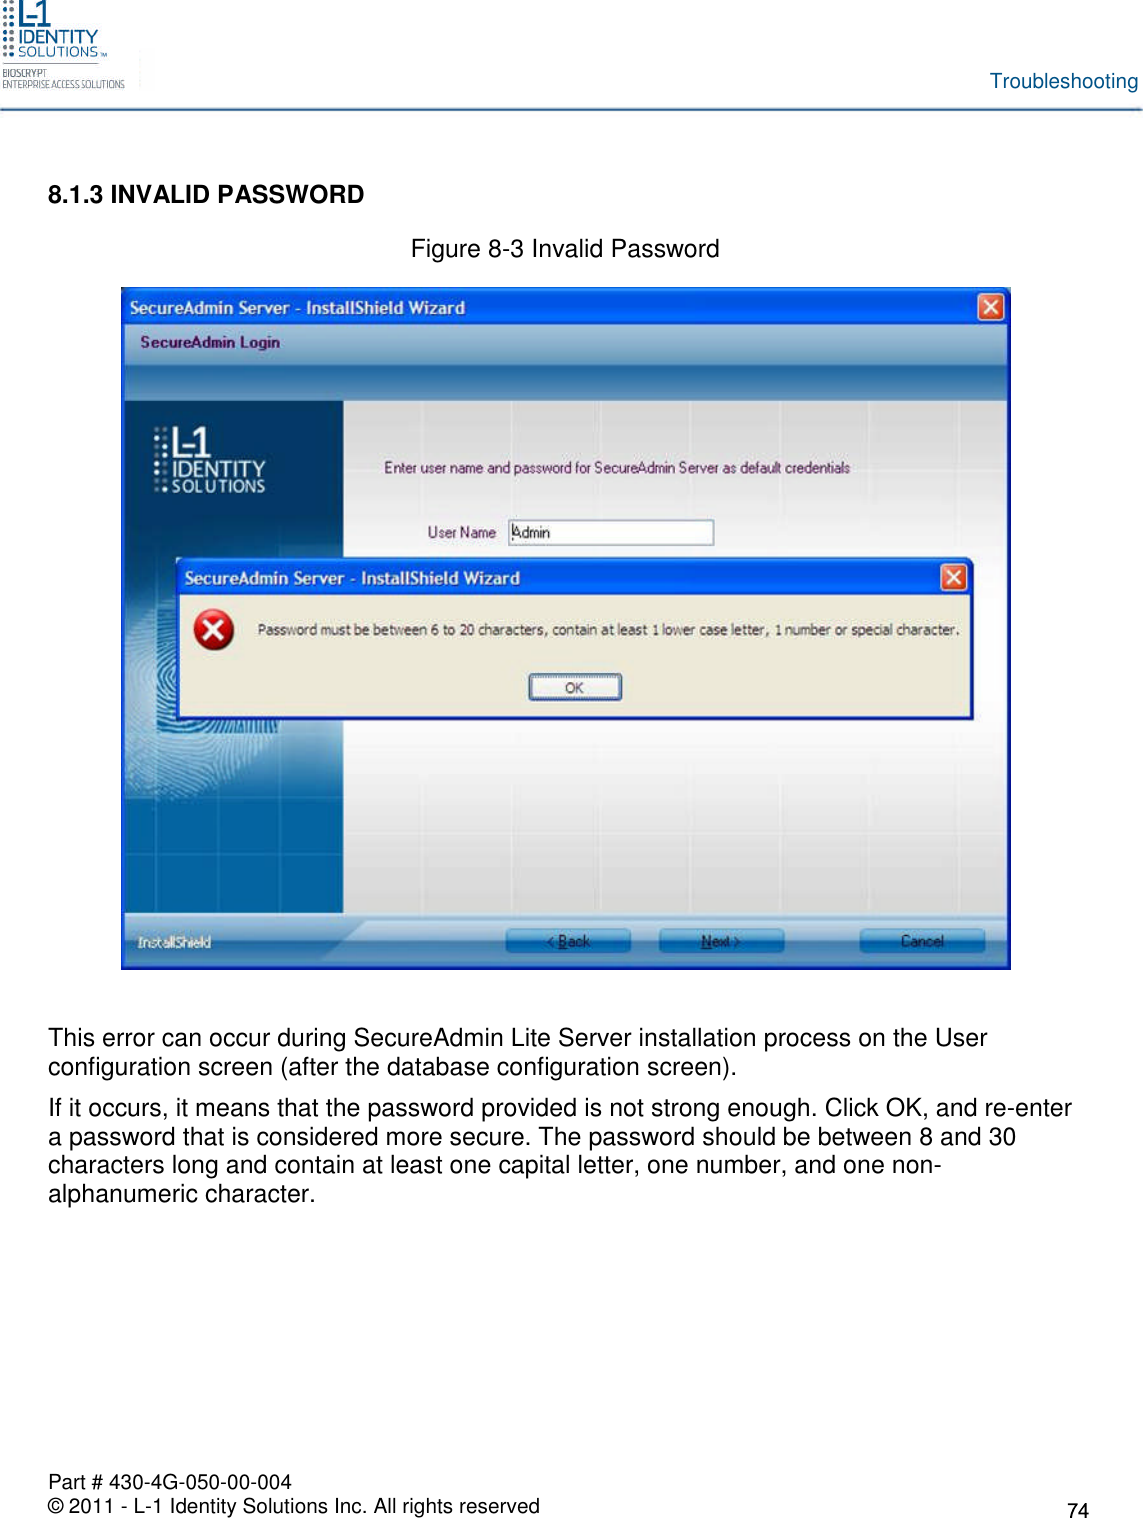 Part # 430-4G-050-00-004© 2011 - L-1 Identity Solutions Inc. All rights reservedTroubleshooting8.1.3 INVALID PASSWORDFigure 8-3 Invalid PasswordThis error can occur during SecureAdmin Lite Server installation process on the Userconfiguration screen (after the database configuration screen).If it occurs, it means that the password provided is not strong enough. Click OK, and re-entera password that is considered more secure. The password should be between 8 and 30characters long and contain at least one capital letter, one number, and one non-alphanumeric character.